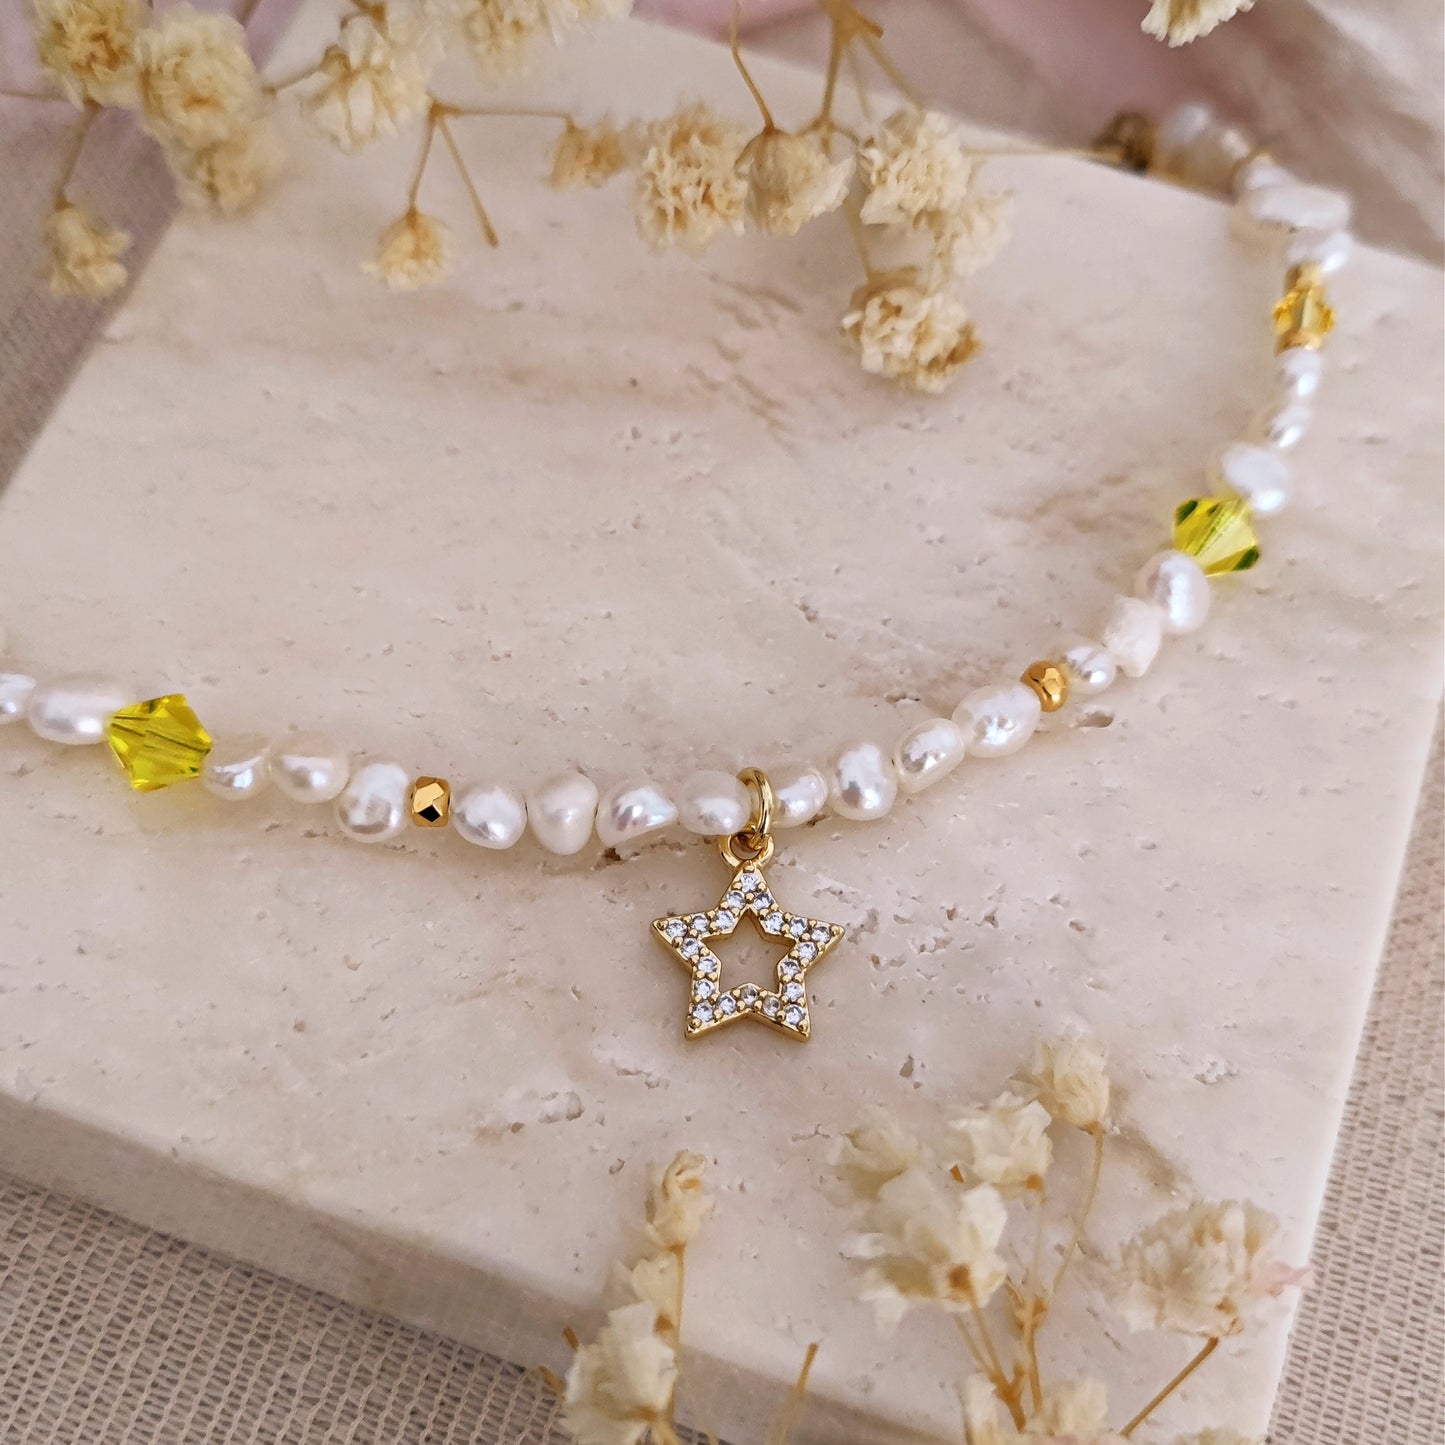 Bracelet with freshwater pearls, yelllow crystals and star // MIGINA